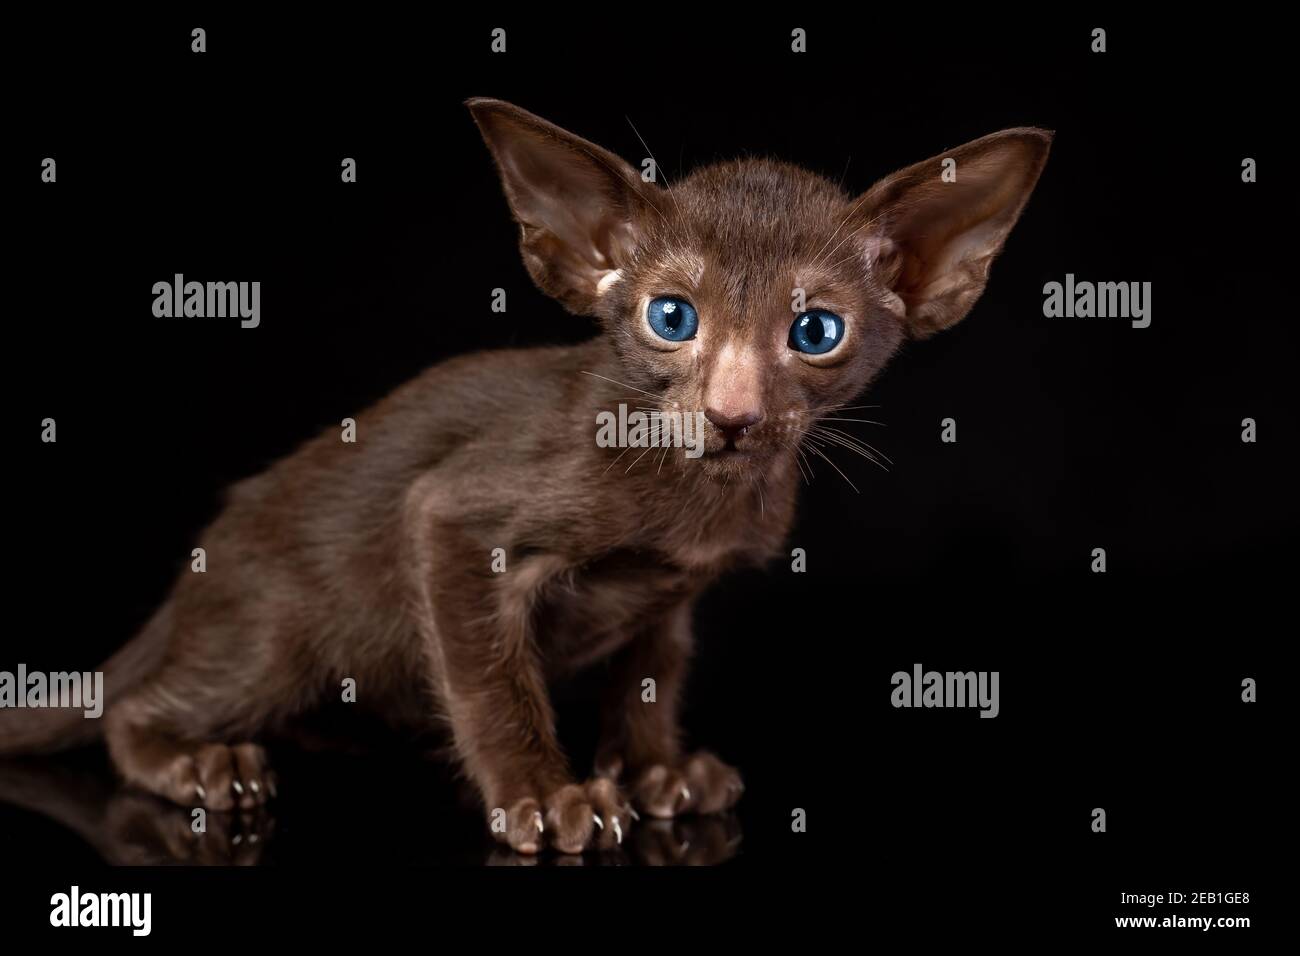 Little kitten of oriental cat breed of solid chocolate brown color with blue eyes is sitting against black background Stock Photo